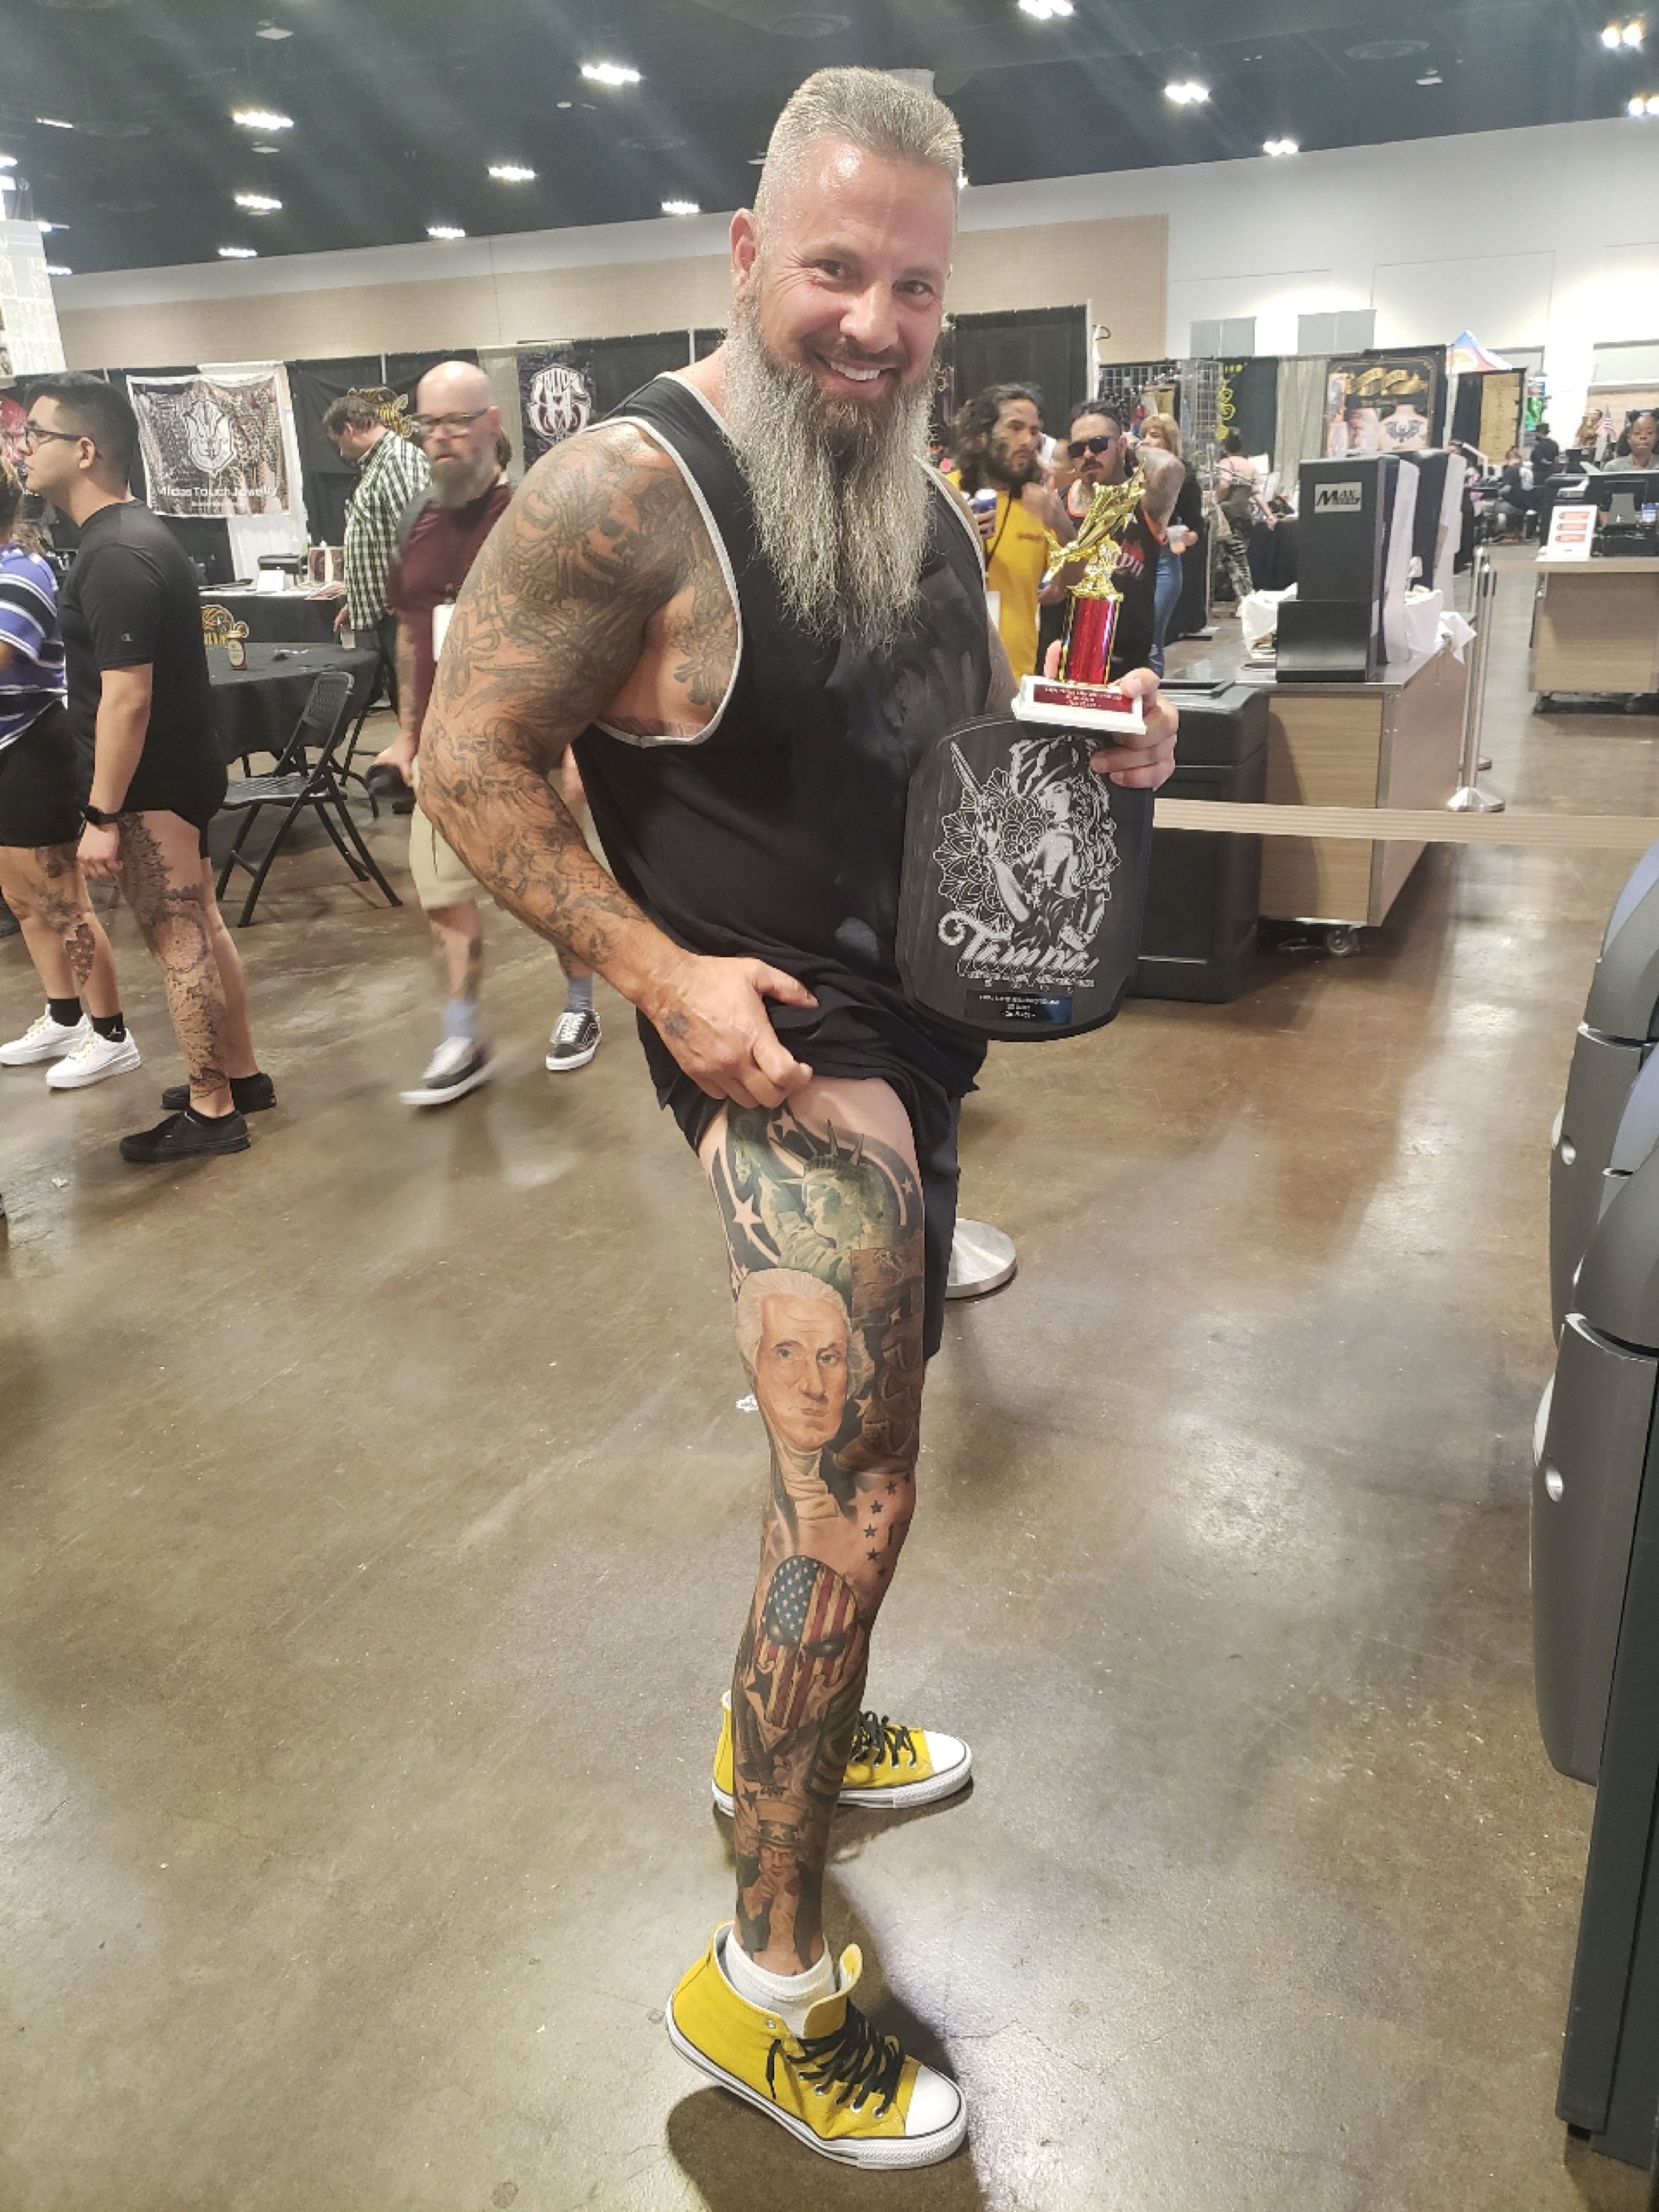 Tattoo uploaded by Veronica Dey • 3rd place best leg sleeve at a Tampa  Tattoo Arts convention • Tattoodo